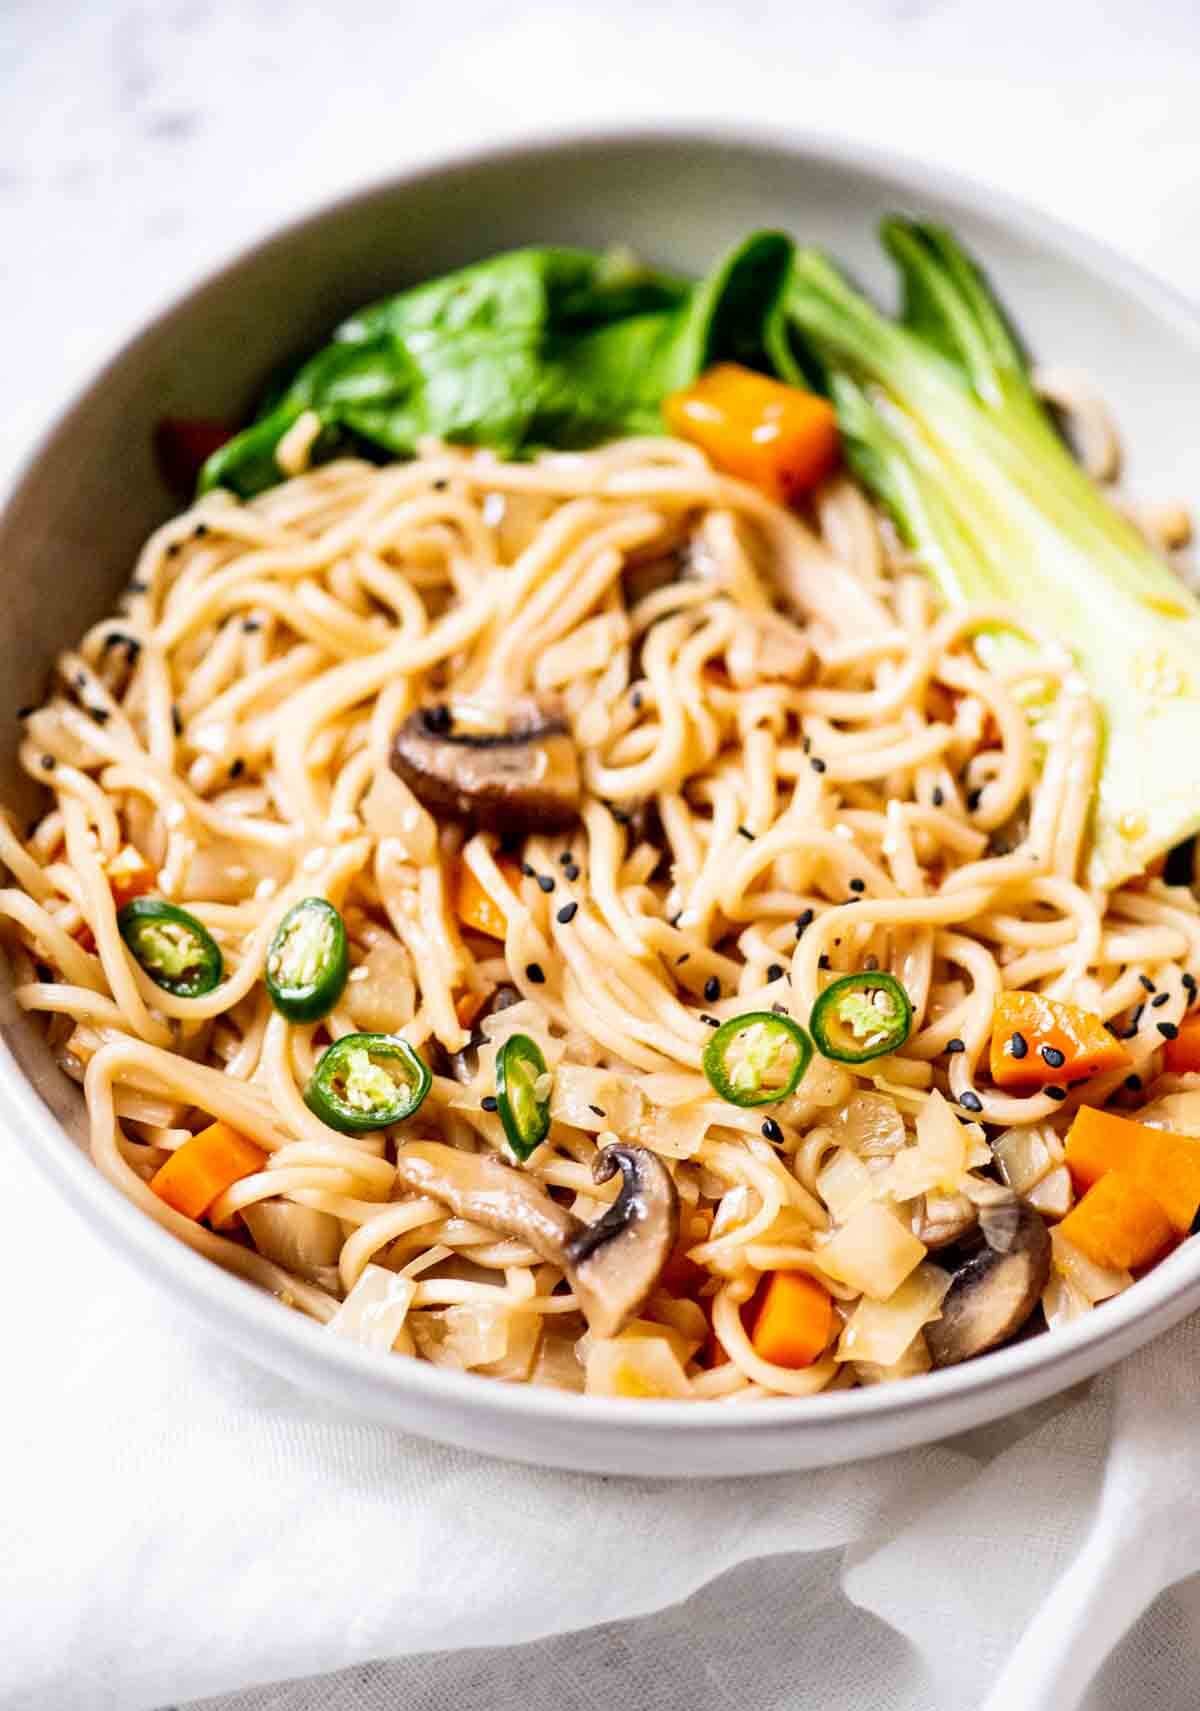 whote bowl with noodles and veggies